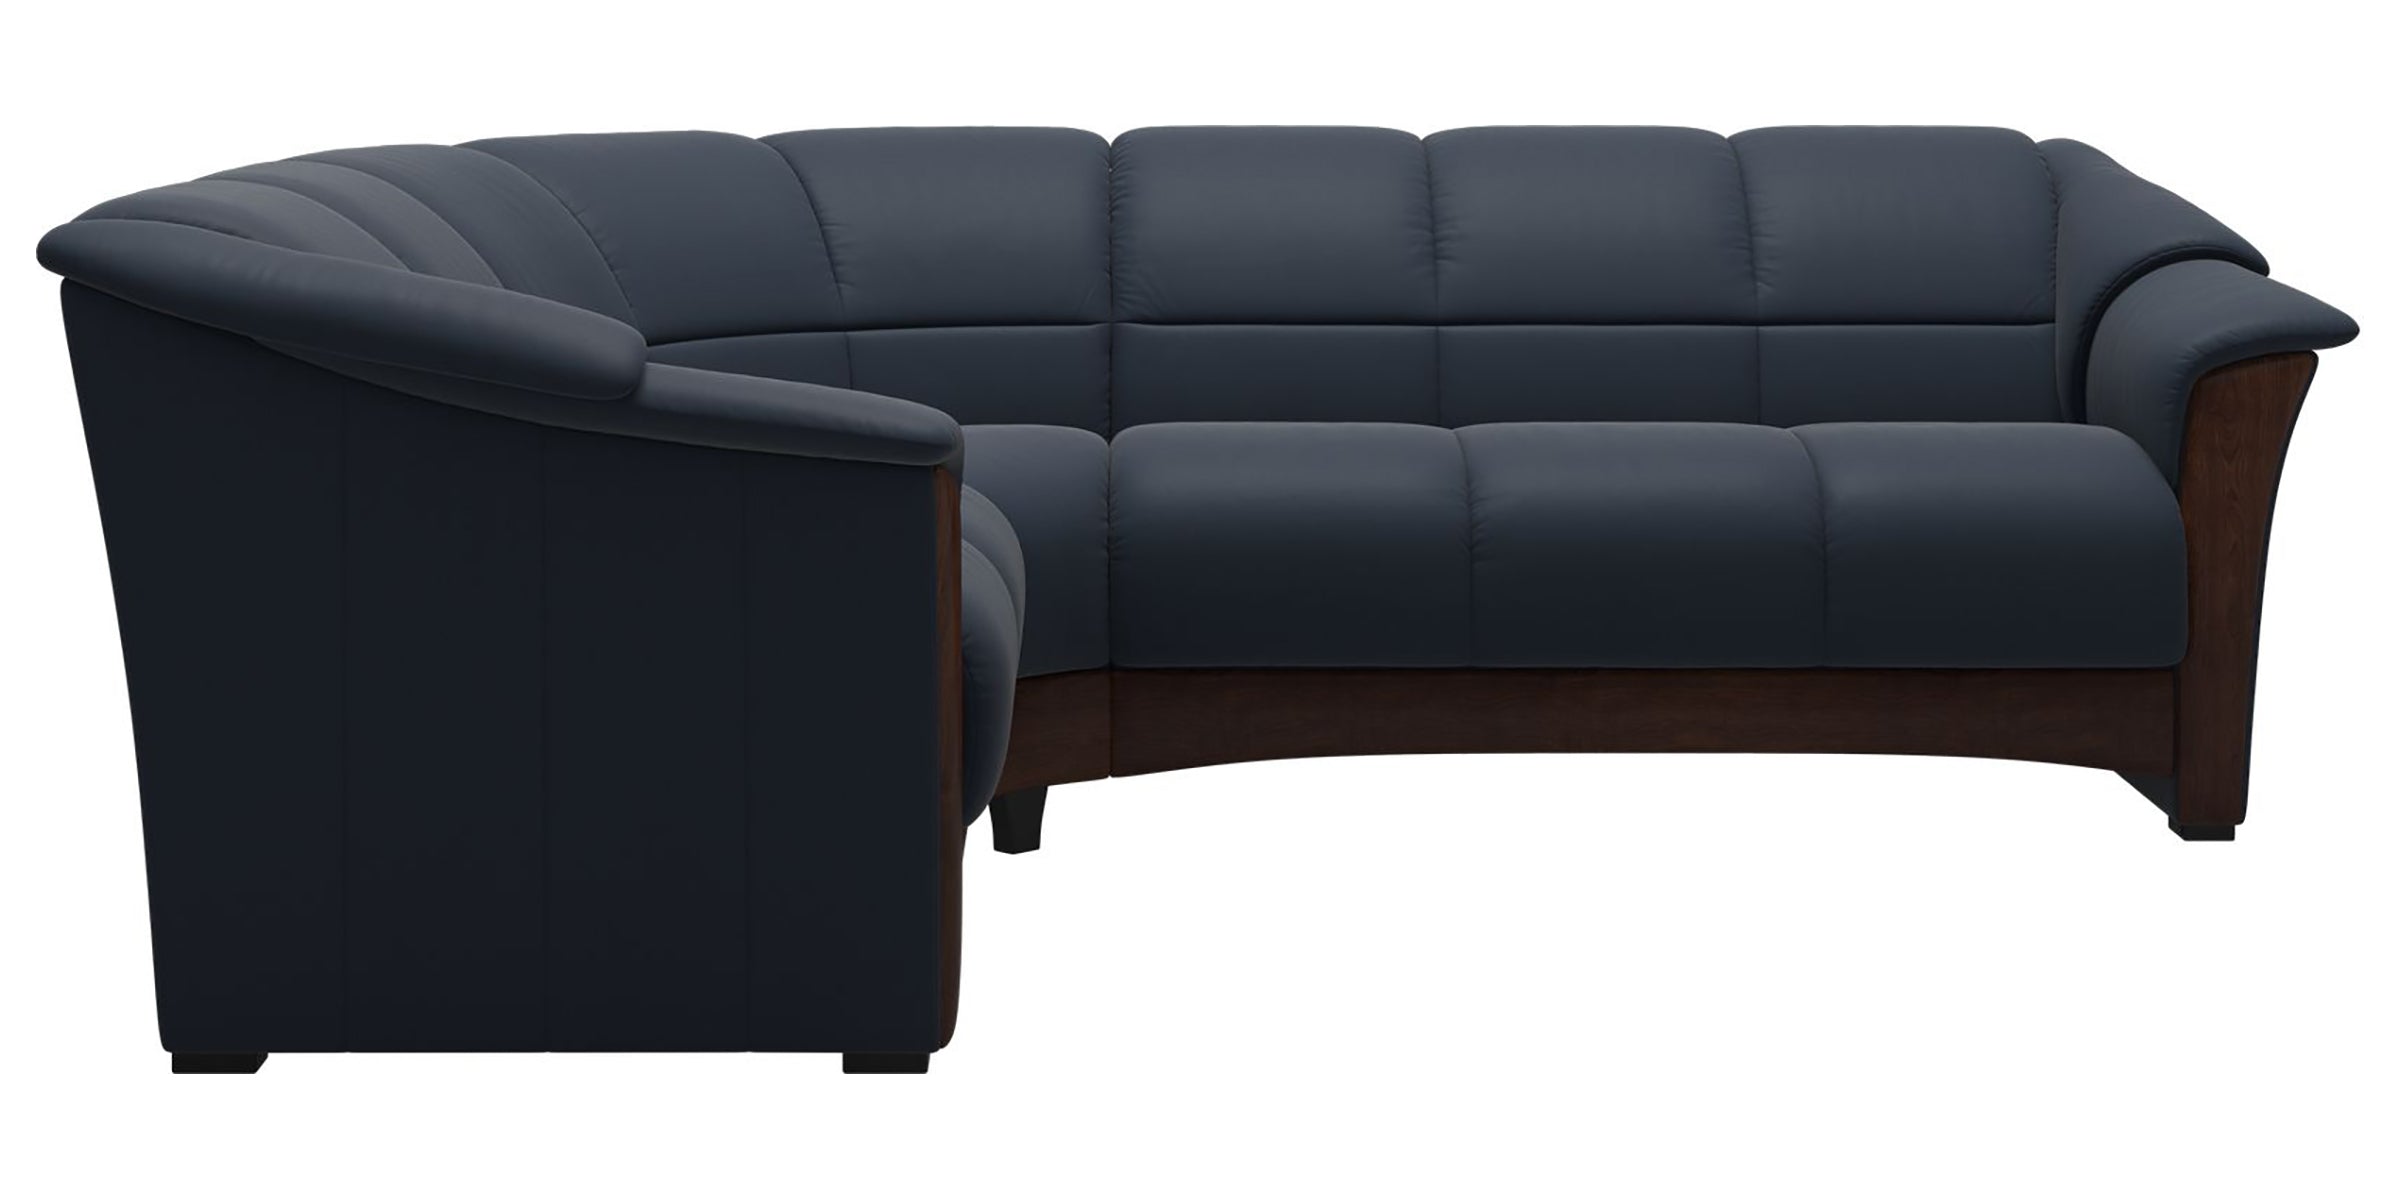 Paloma Leather Oxford Blue and Brown Base | Stressless Oslo Sectional | Valley Ridge Furniture